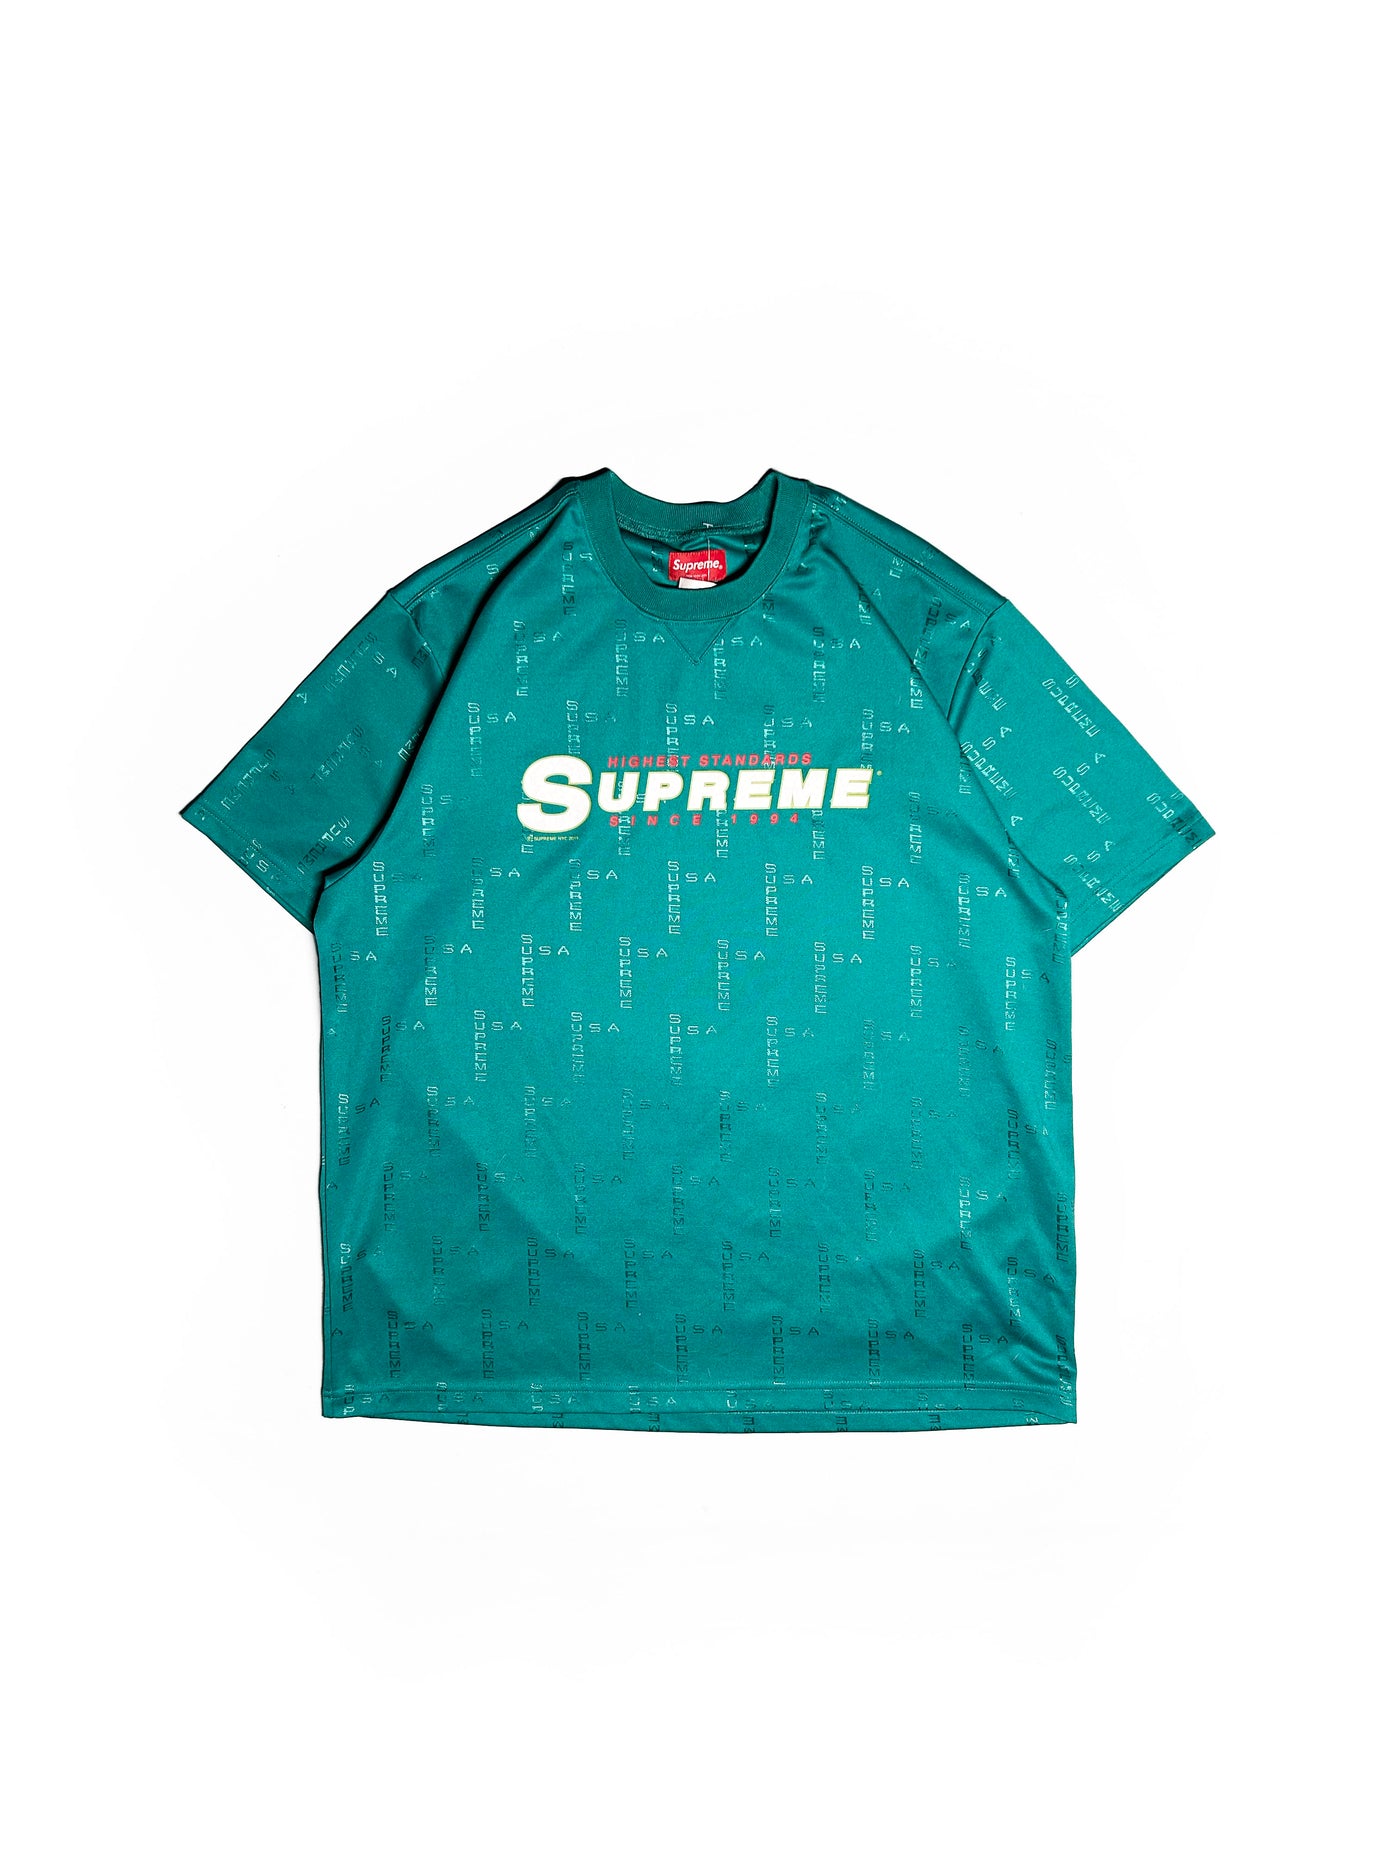 2019 Supreme Highes Standard Athletic T-Shirt